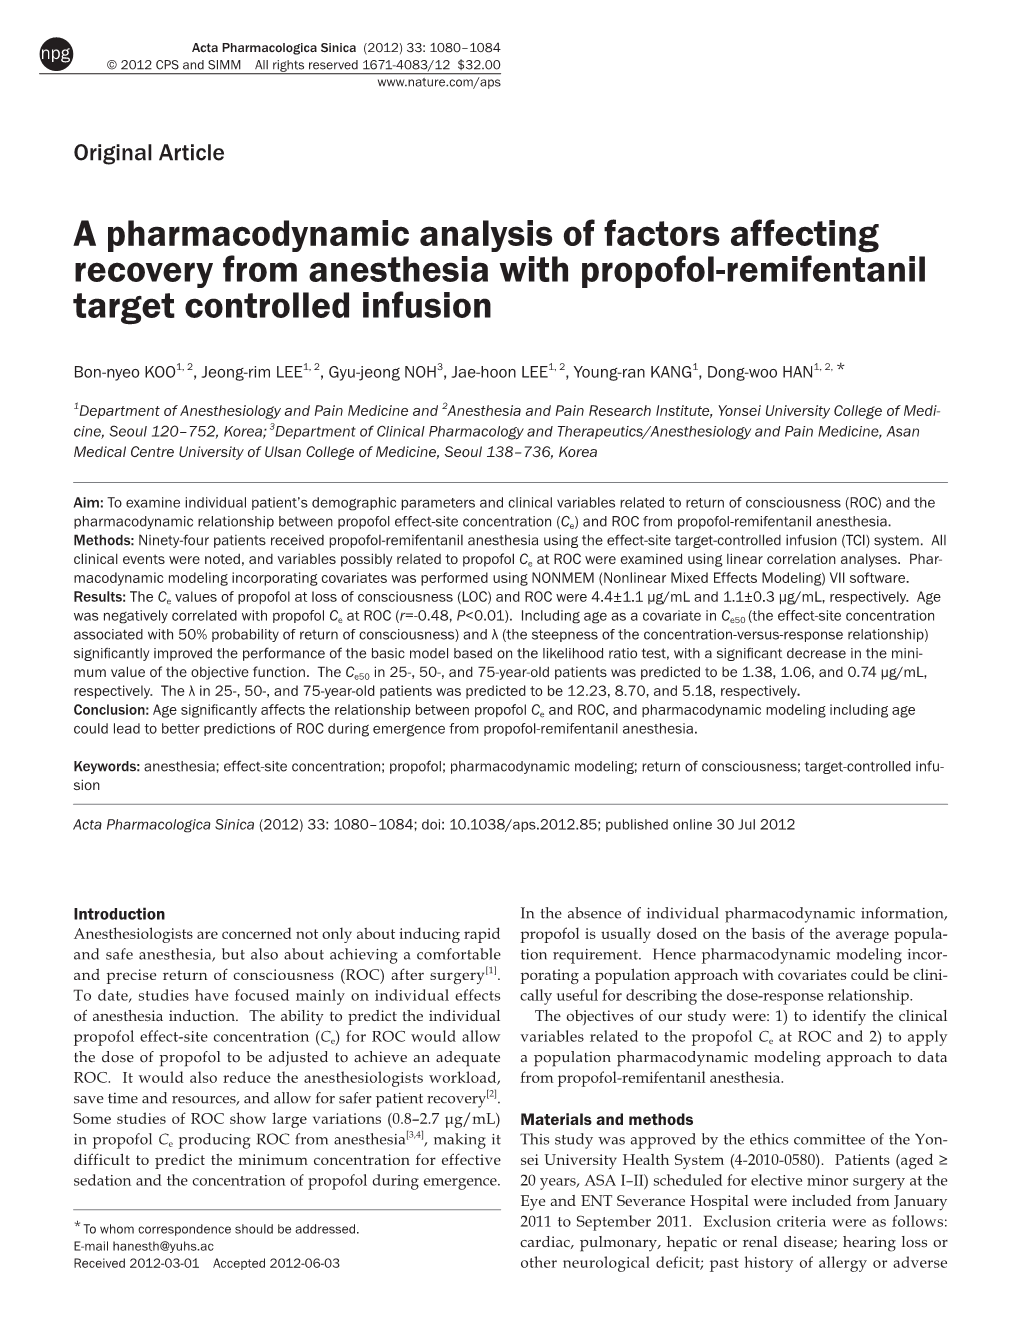 A Pharmacodynamic Analysis of Factors Affecting Recovery from Anesthesia with Propofol-Remifentanil Target Controlled Infusion